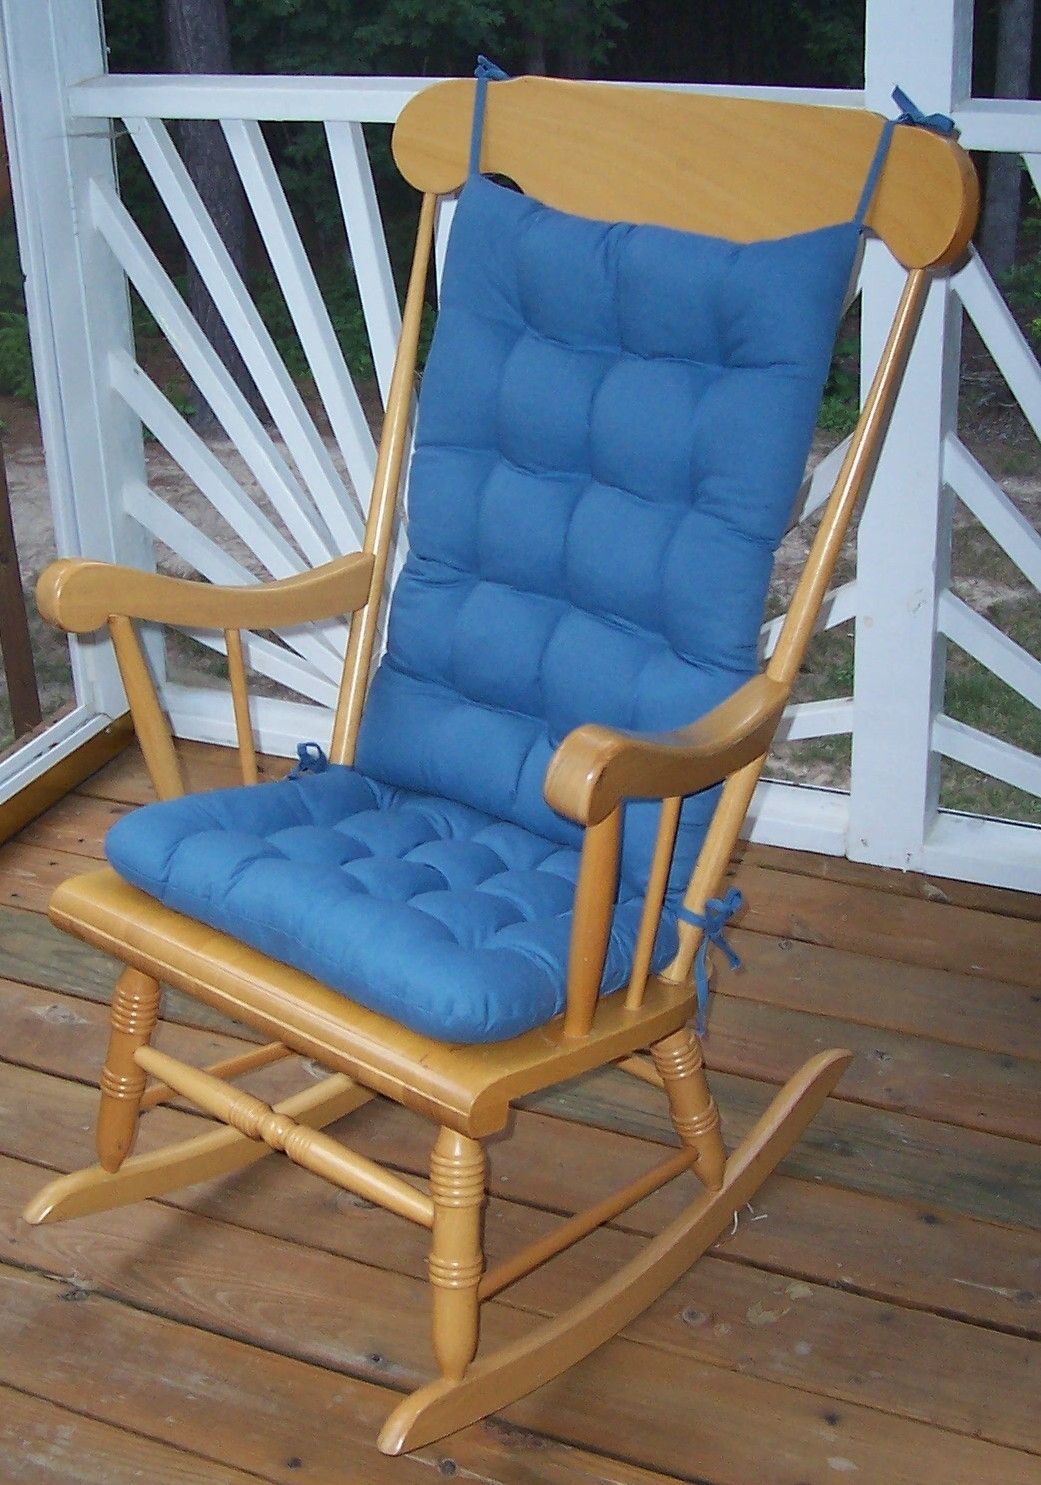 Rocking Chair Cushion Sets And More – Clearance!! Within Rocking Chair Cushions For Outdoor (View 11 of 15)